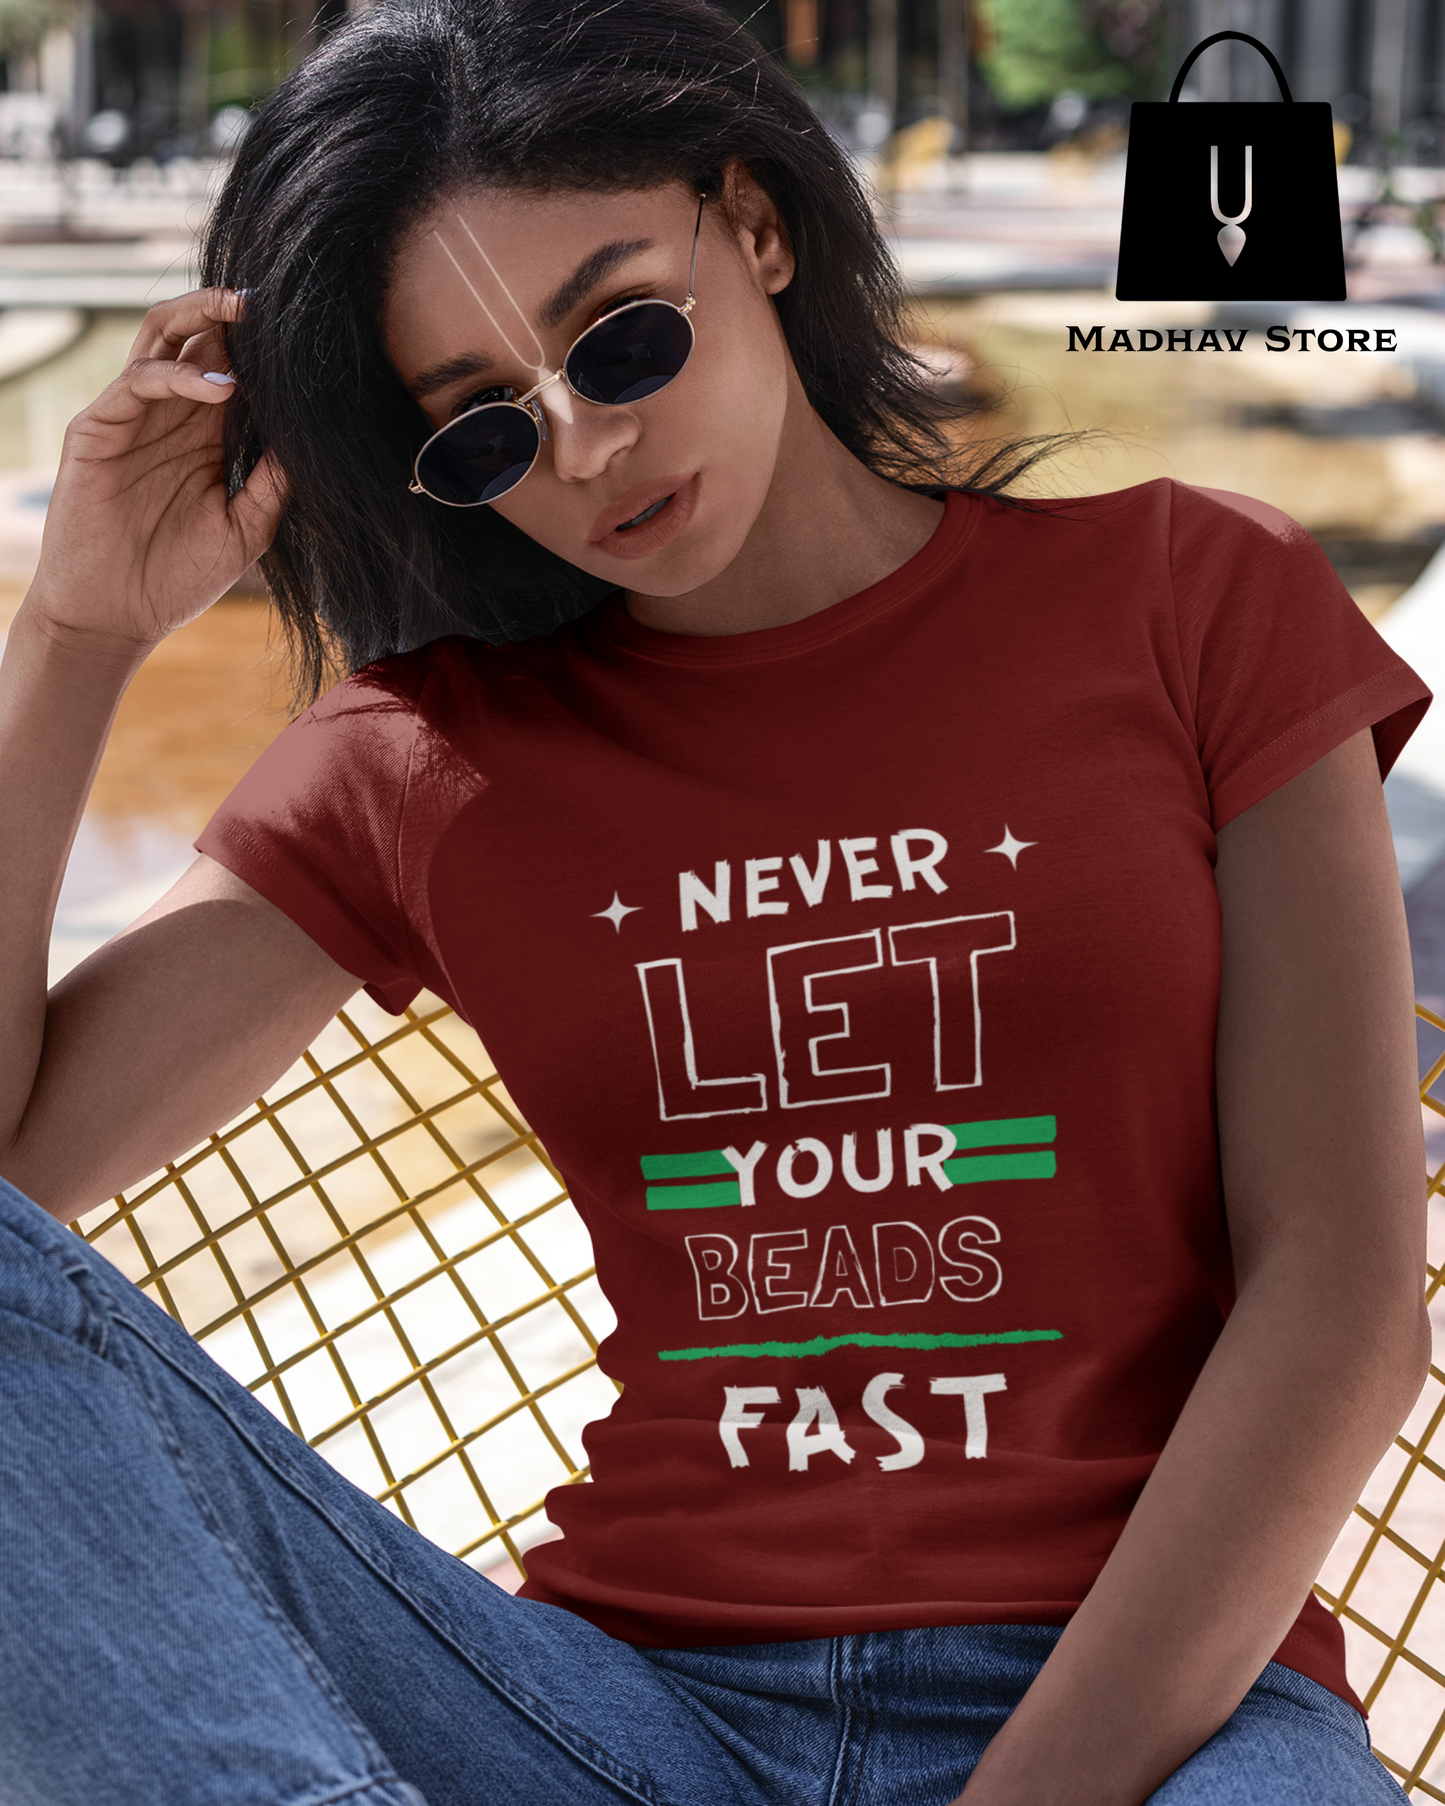 Never Let Your Beads Fast Tshirt for Women